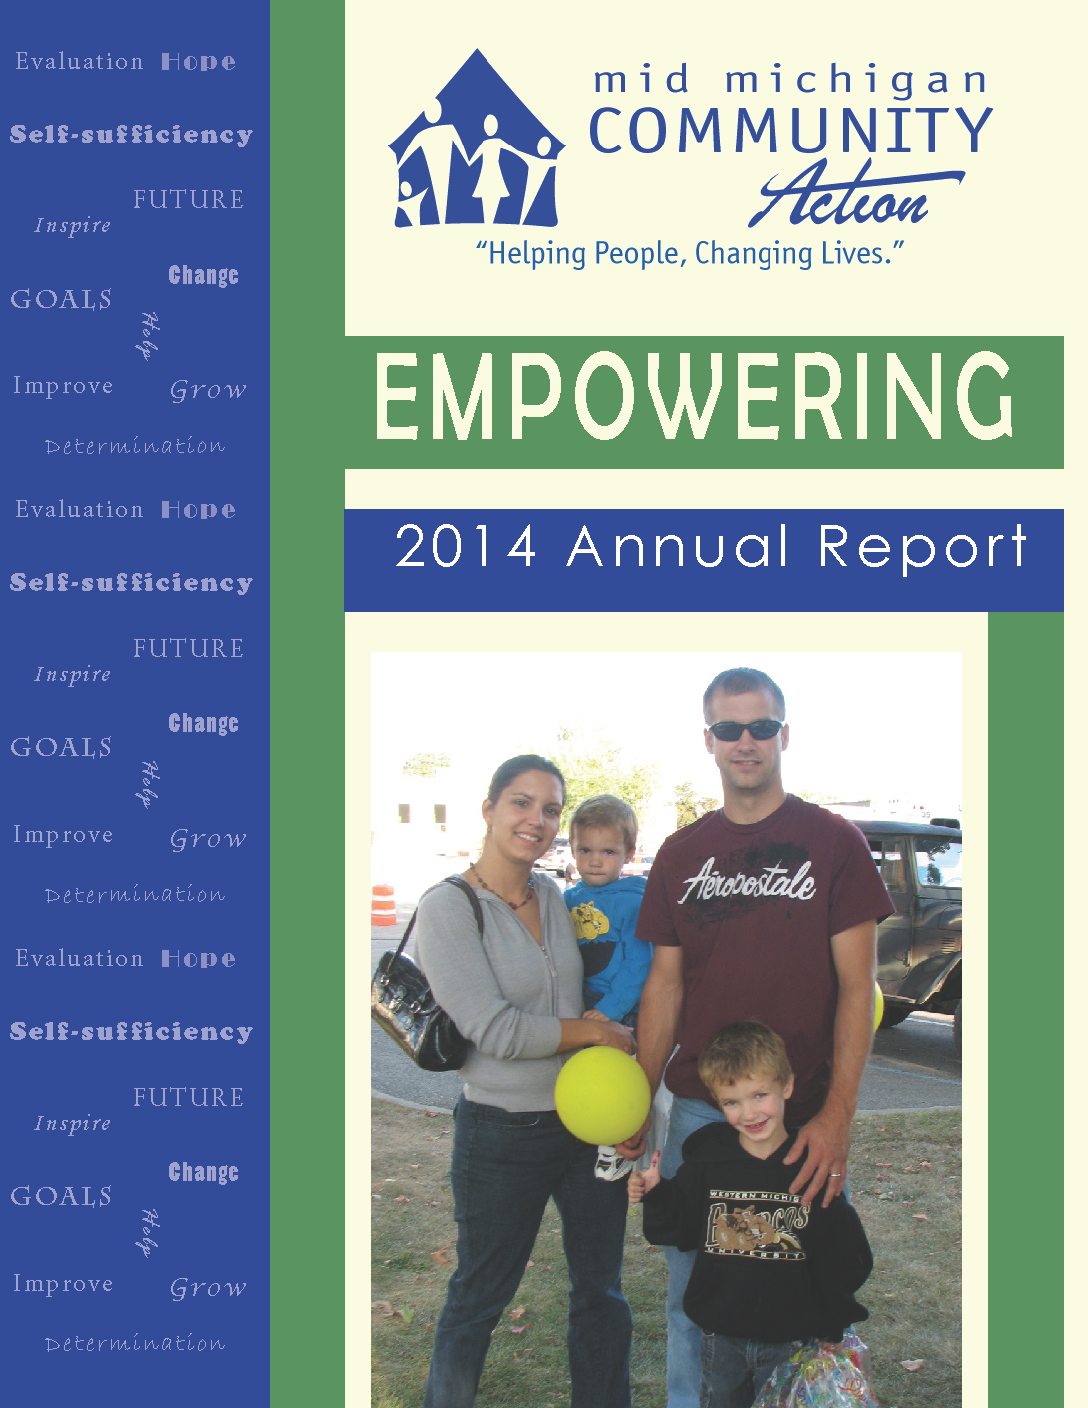 Annual Report 2014 Empowering